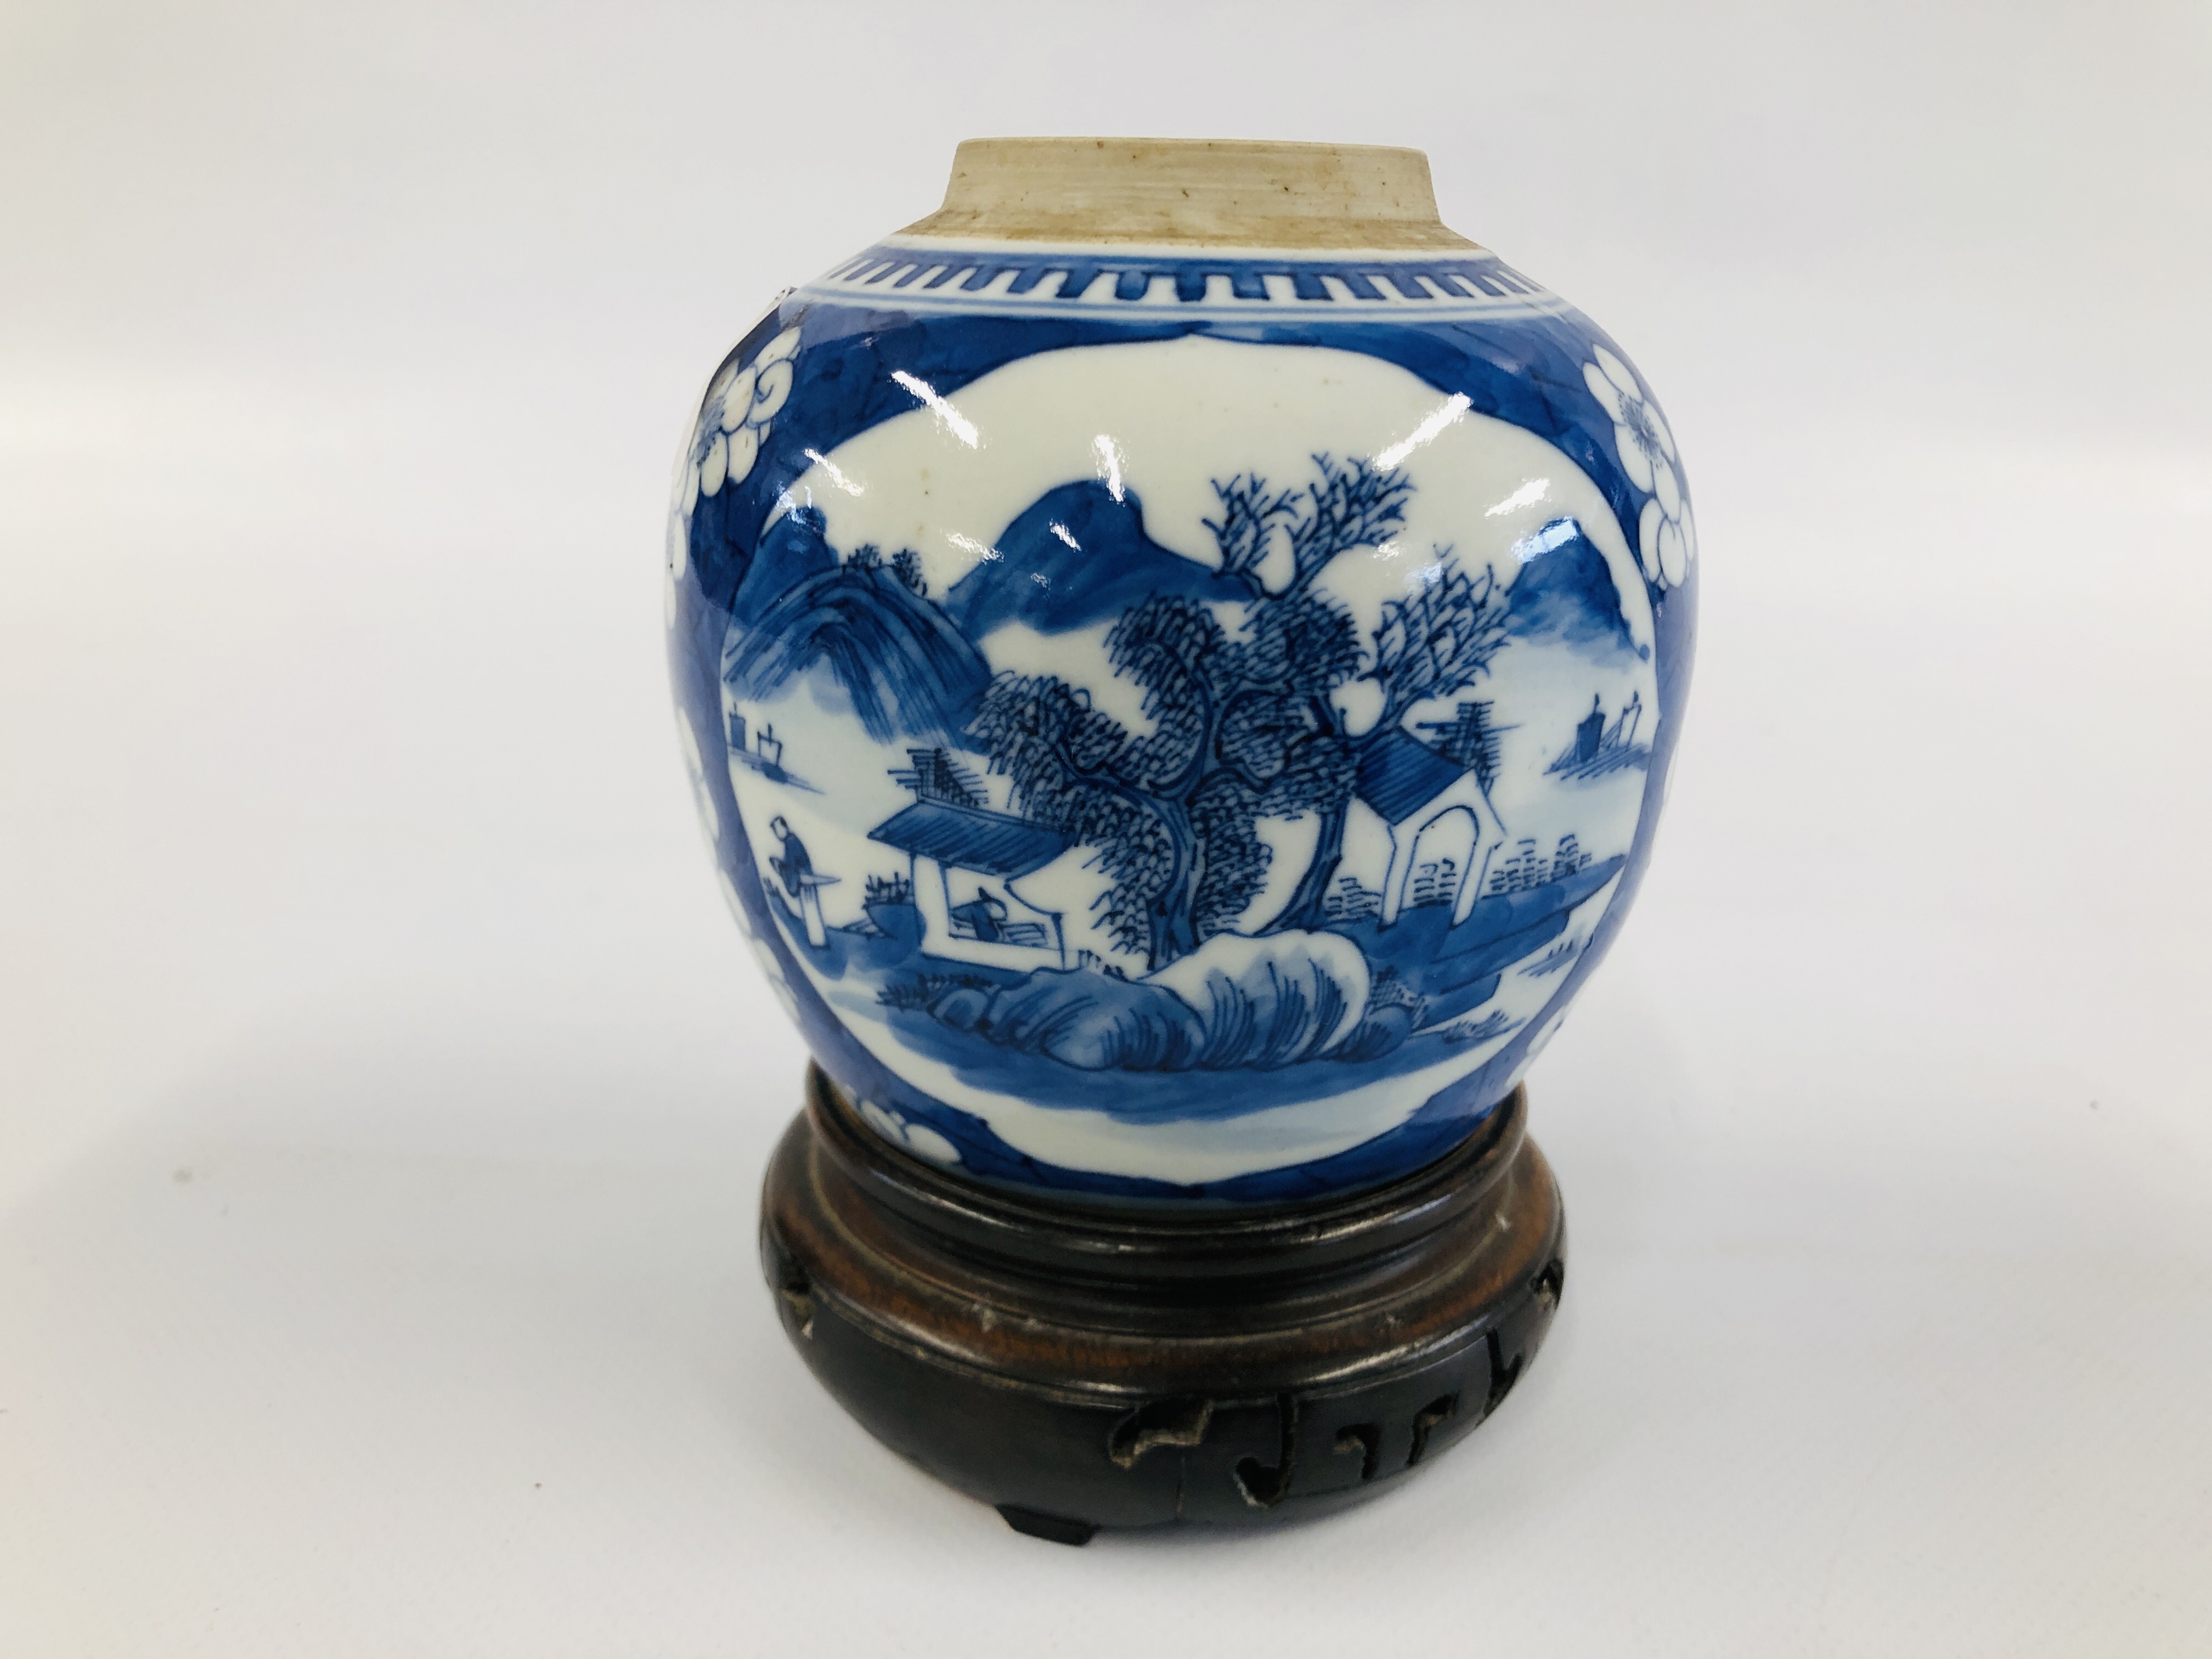 A ORIENTAL BLUE AND WHITE GINGER JAR AND STAND ALONG WITH A JAPANESE BUDDA FIGURE. - Image 5 of 10